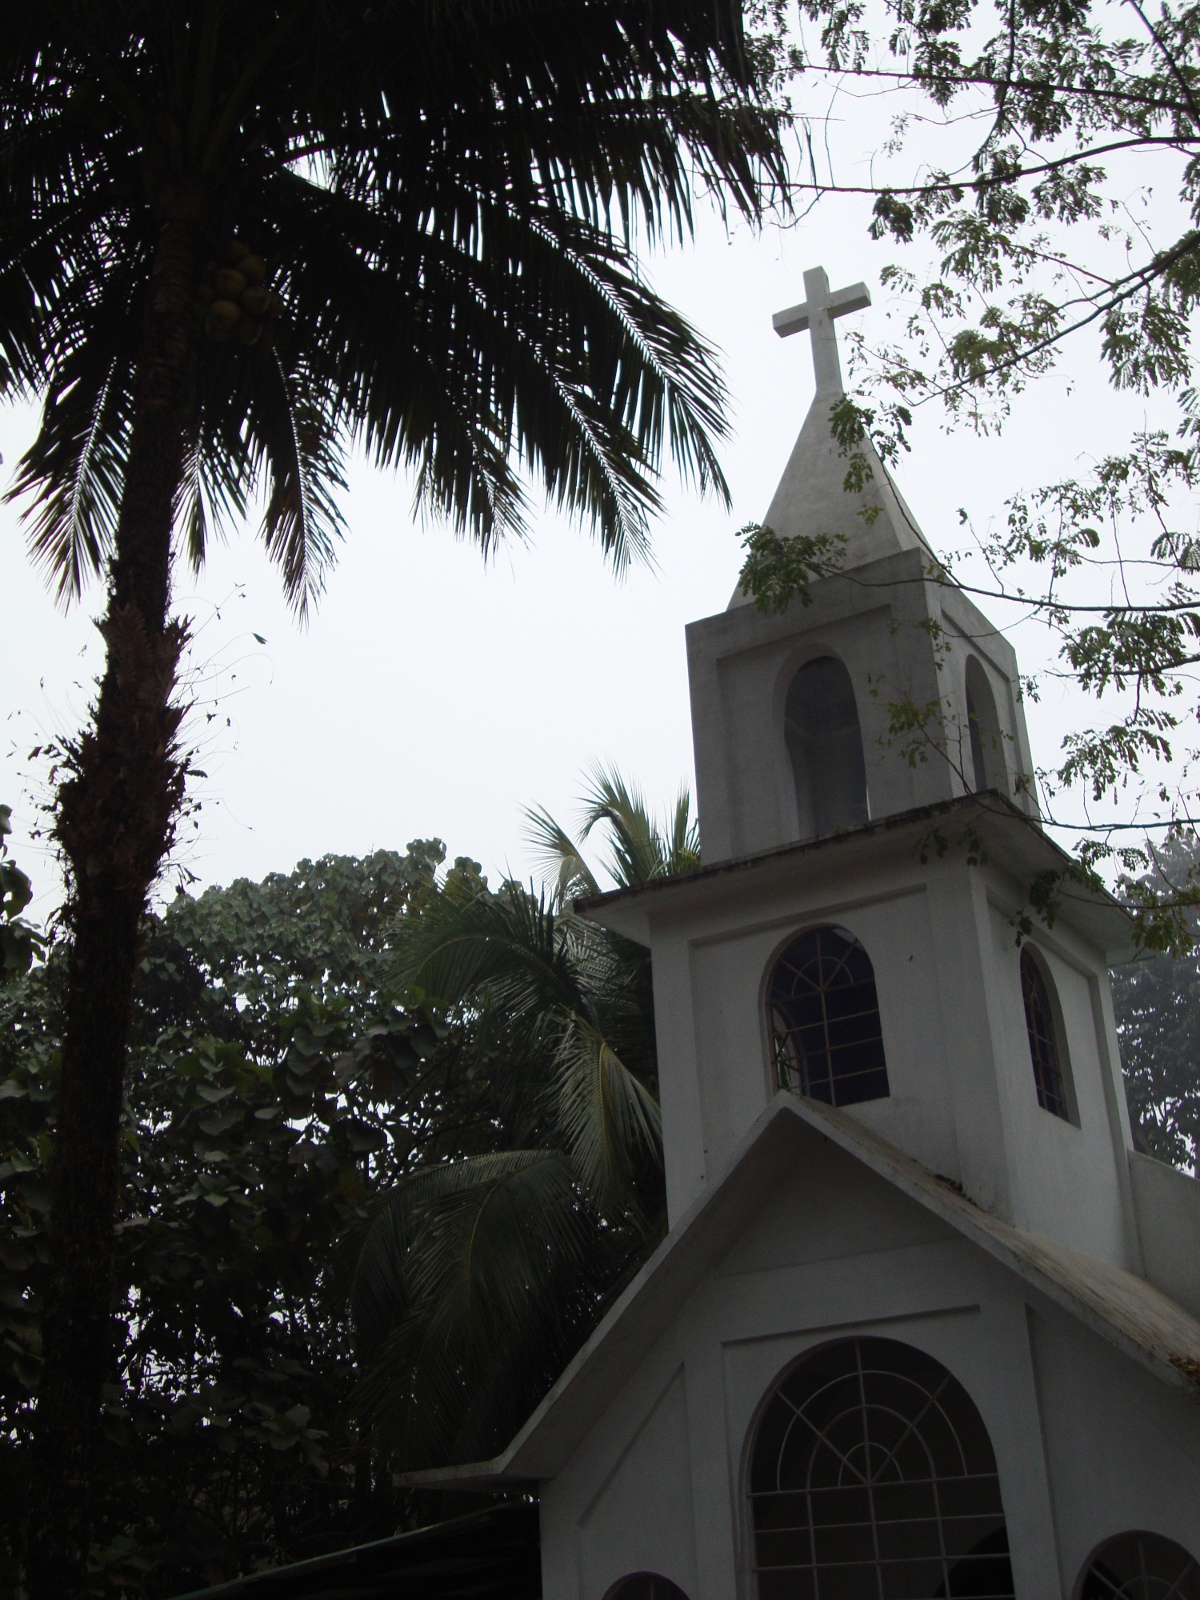 A Garo church, a common sight in the hills.